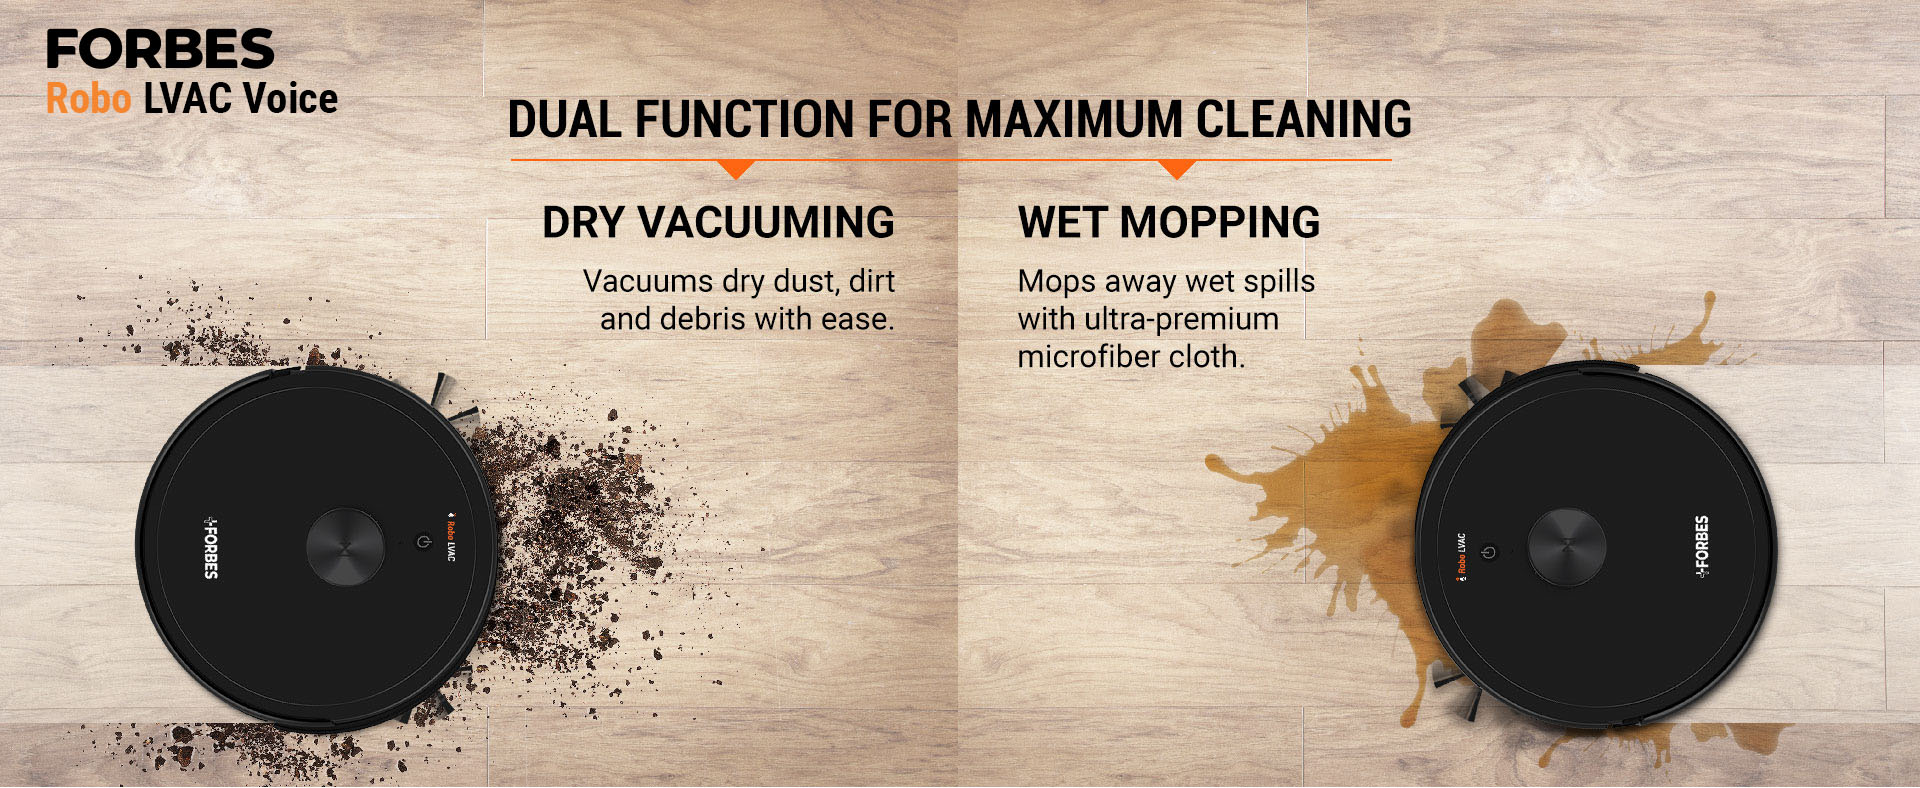 DRY VACUUMING Vacuums dry dust, dirt and debris with ease. WET MOPPING Mops away wet spills with ultra-premium microfiber cloth.